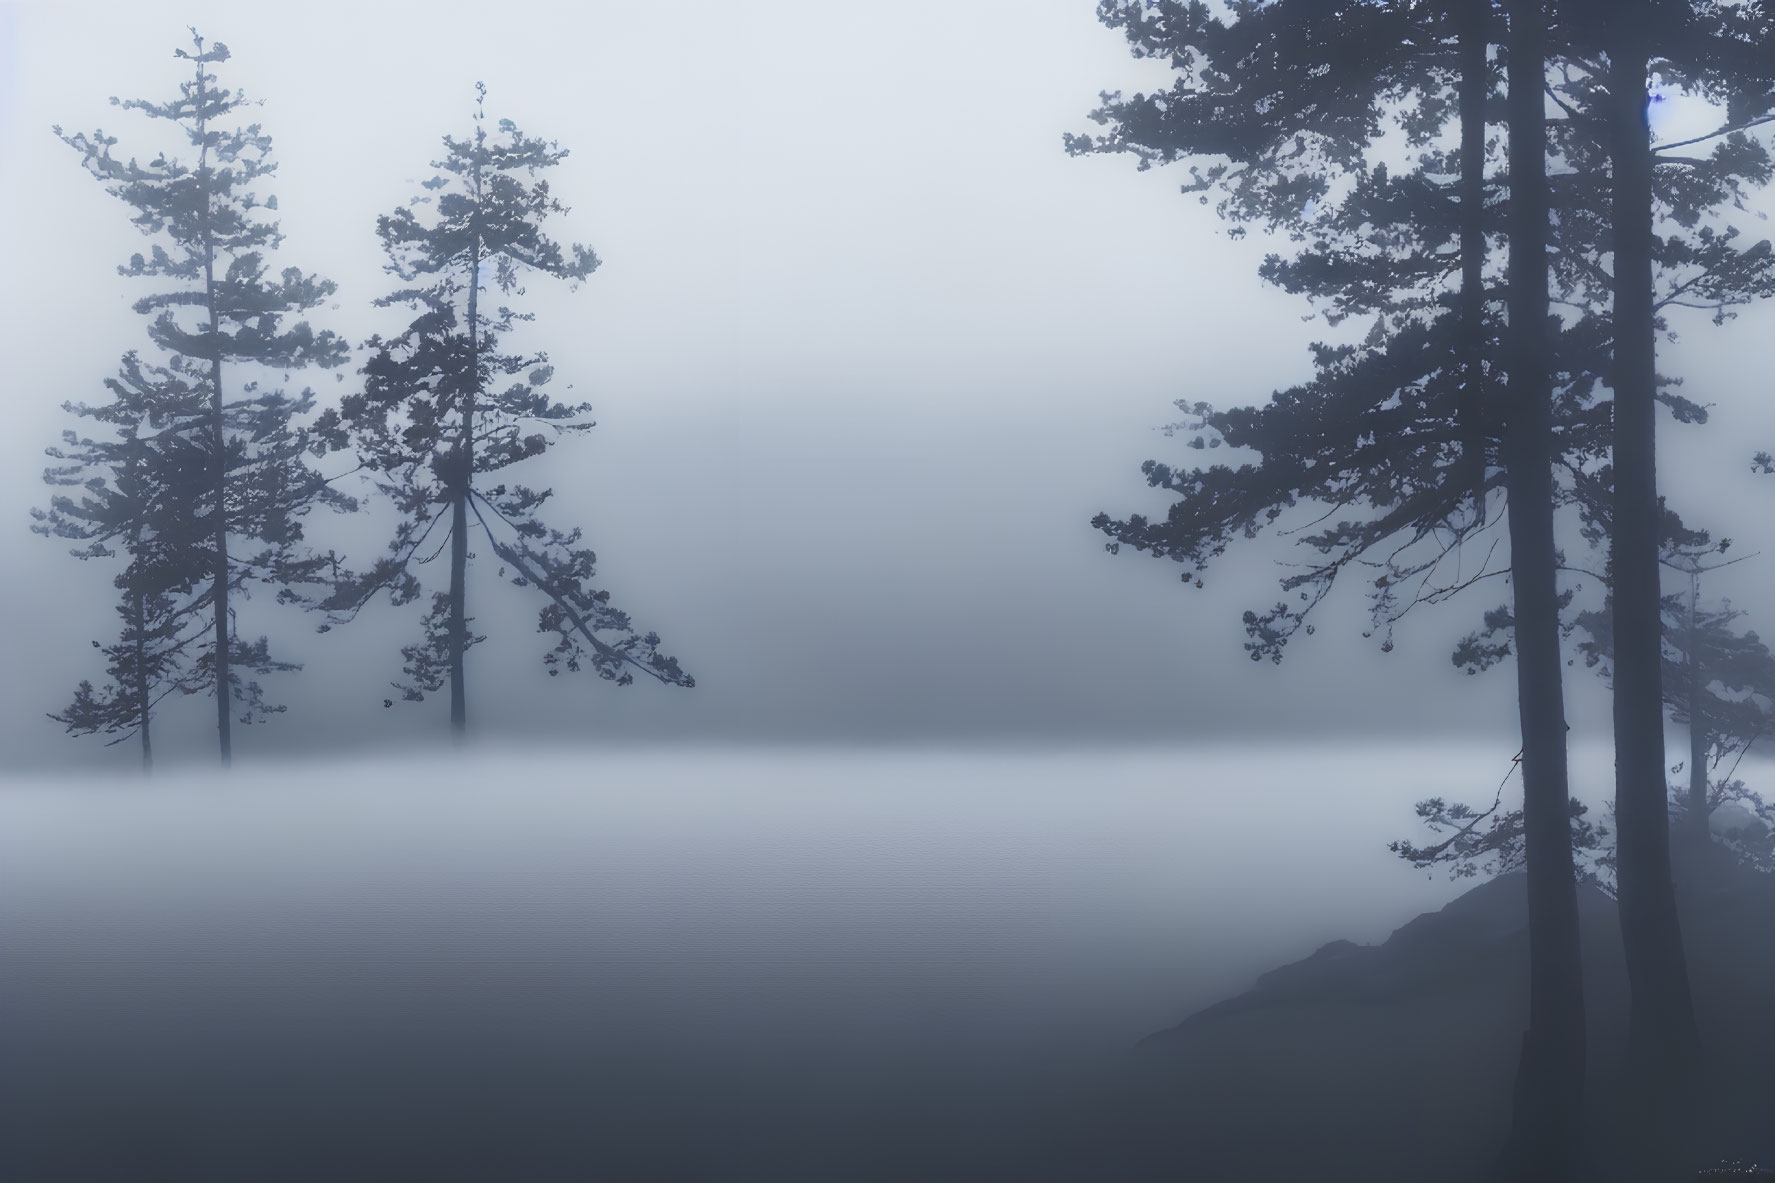 Foggy landscape with tall tree silhouettes in serene setting